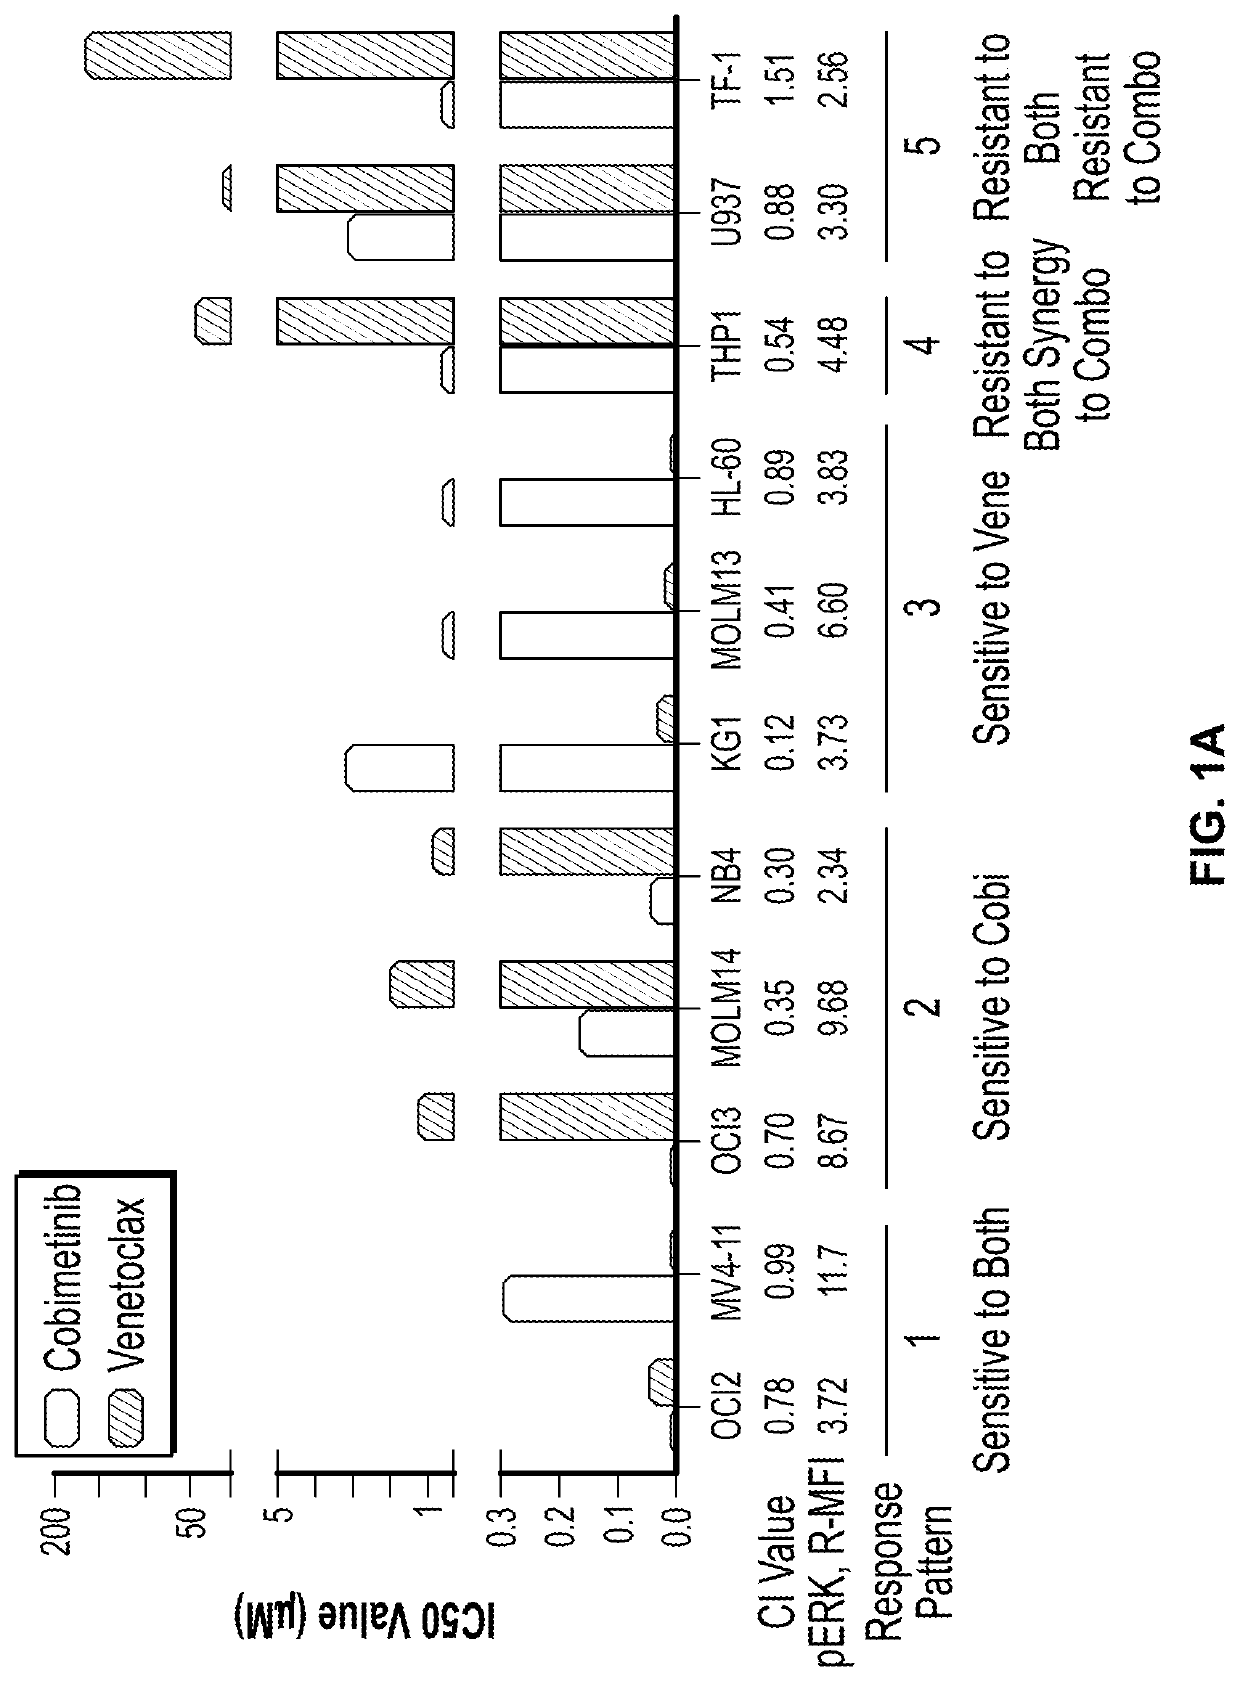 Combination of Bcl-2 inhibitor and MEK inhibitor for the treatment of cancer